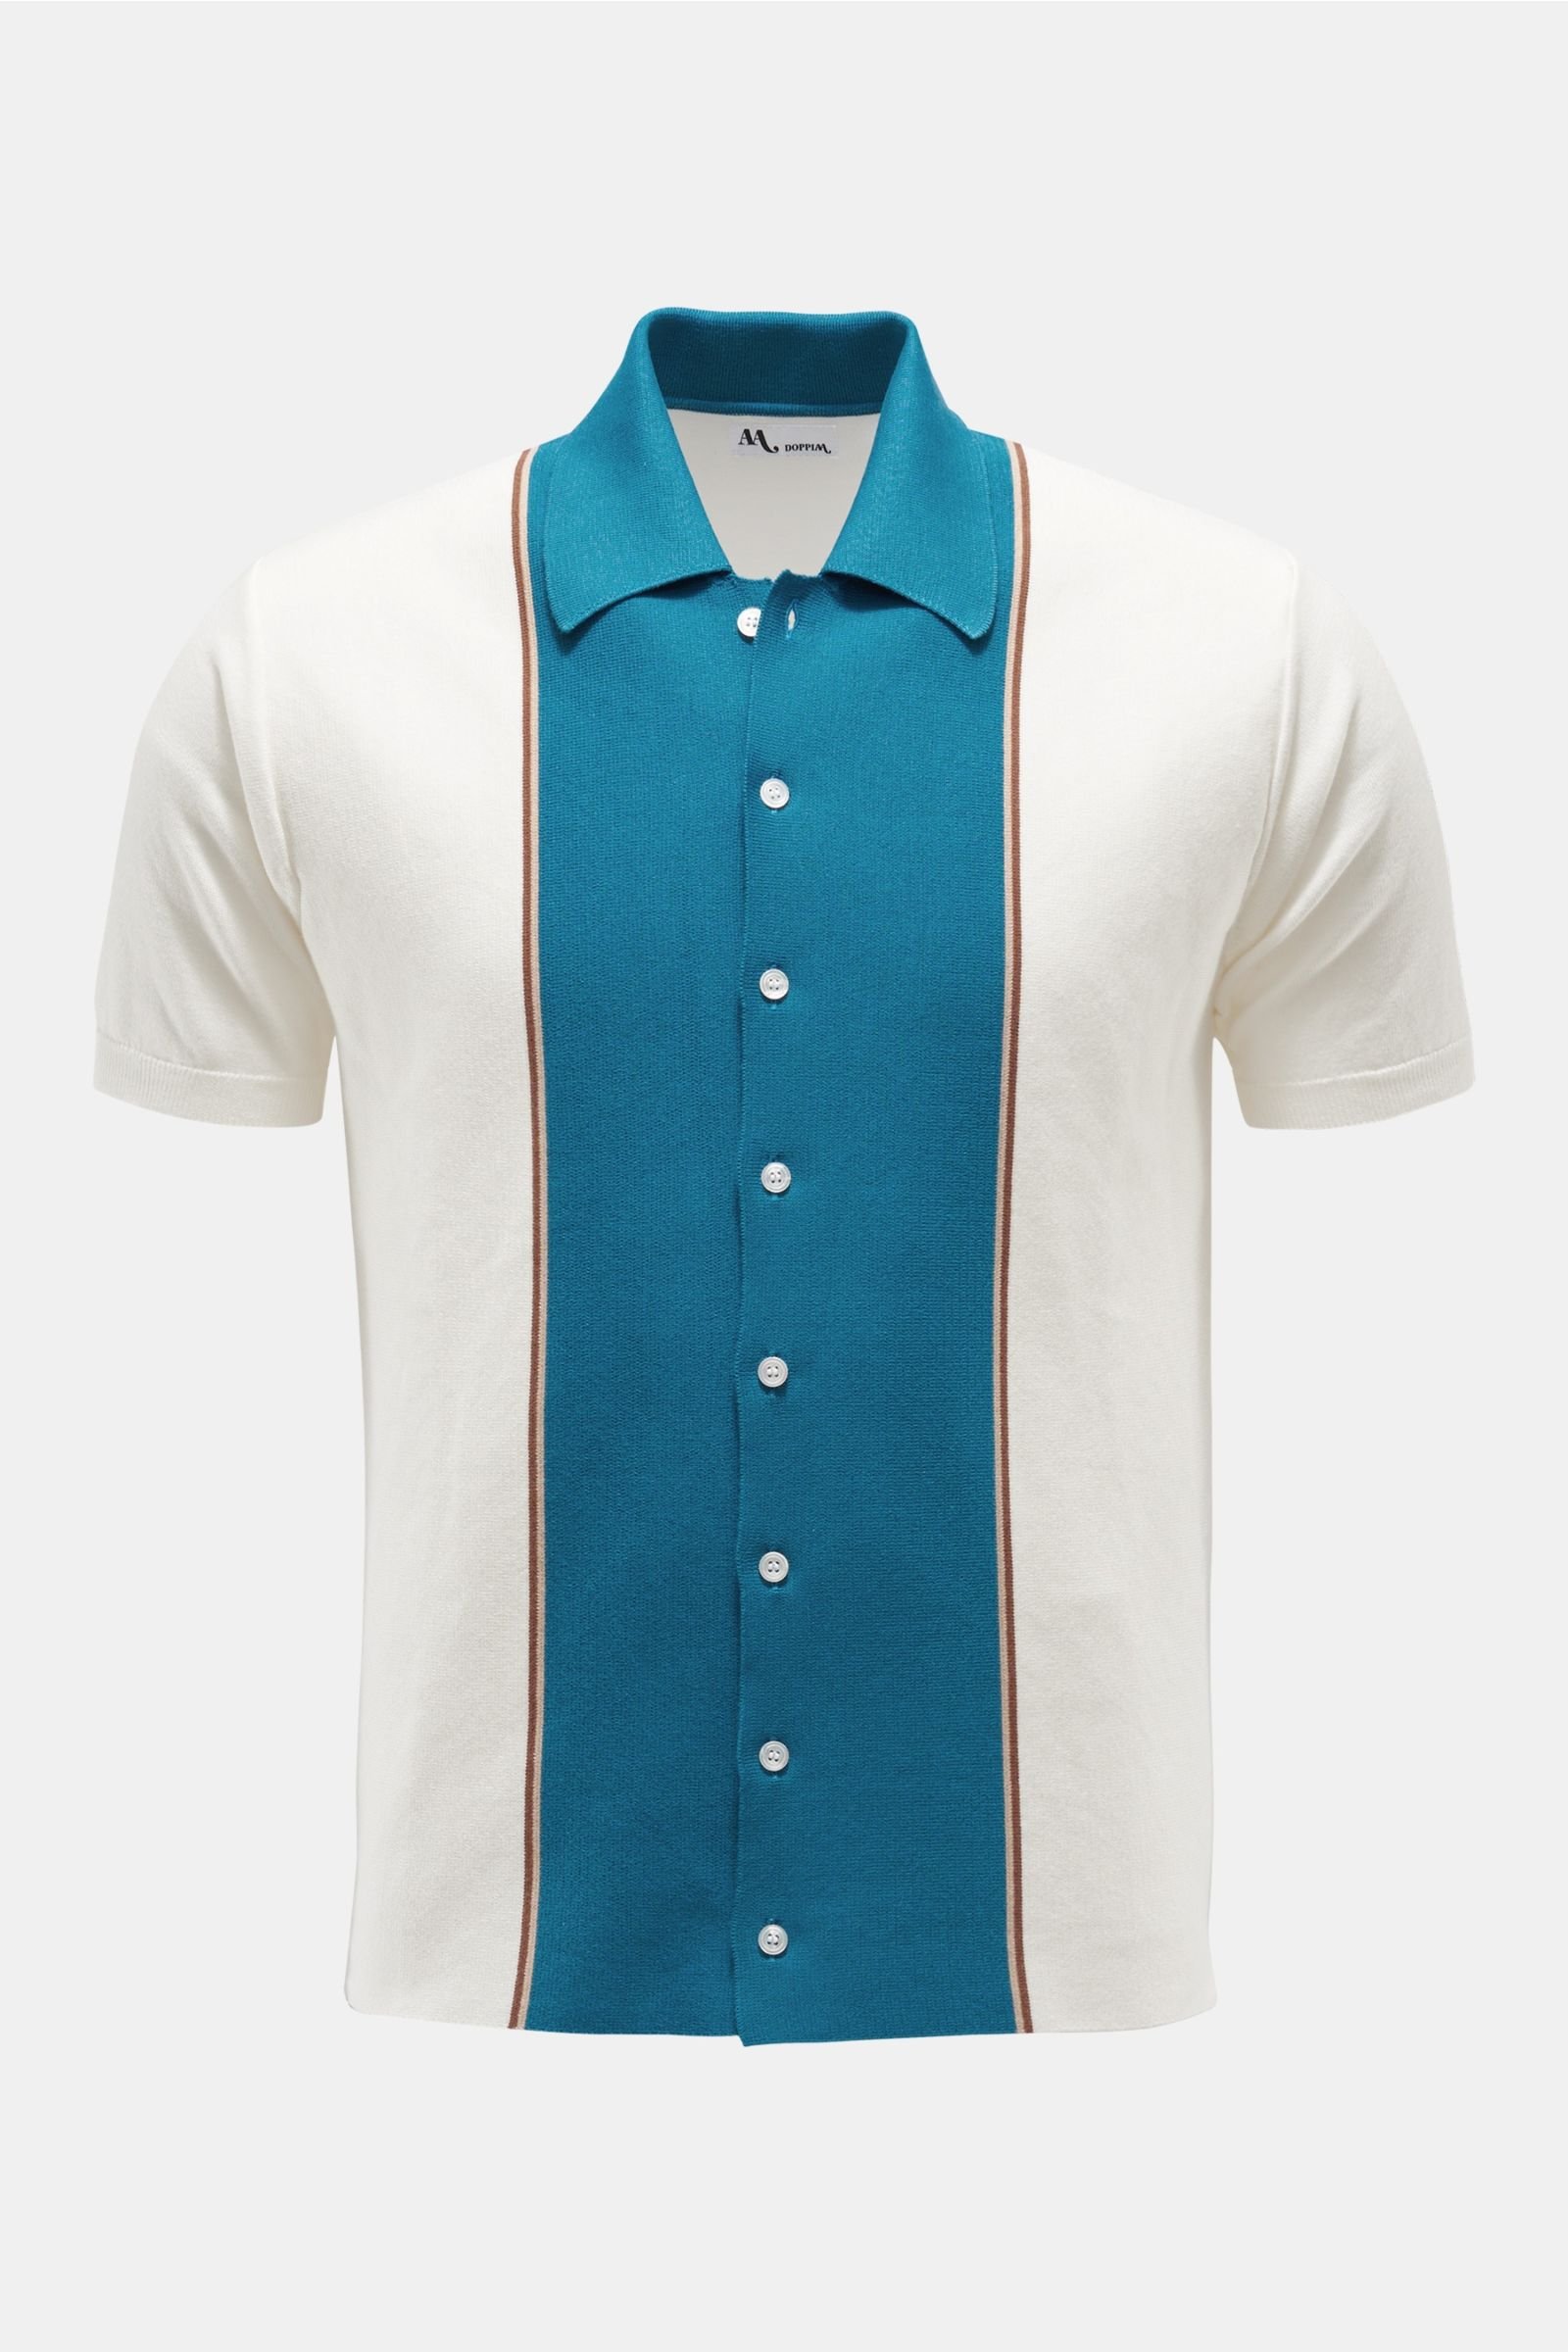 Short sleeve shirt 'Aars' off-white/teal